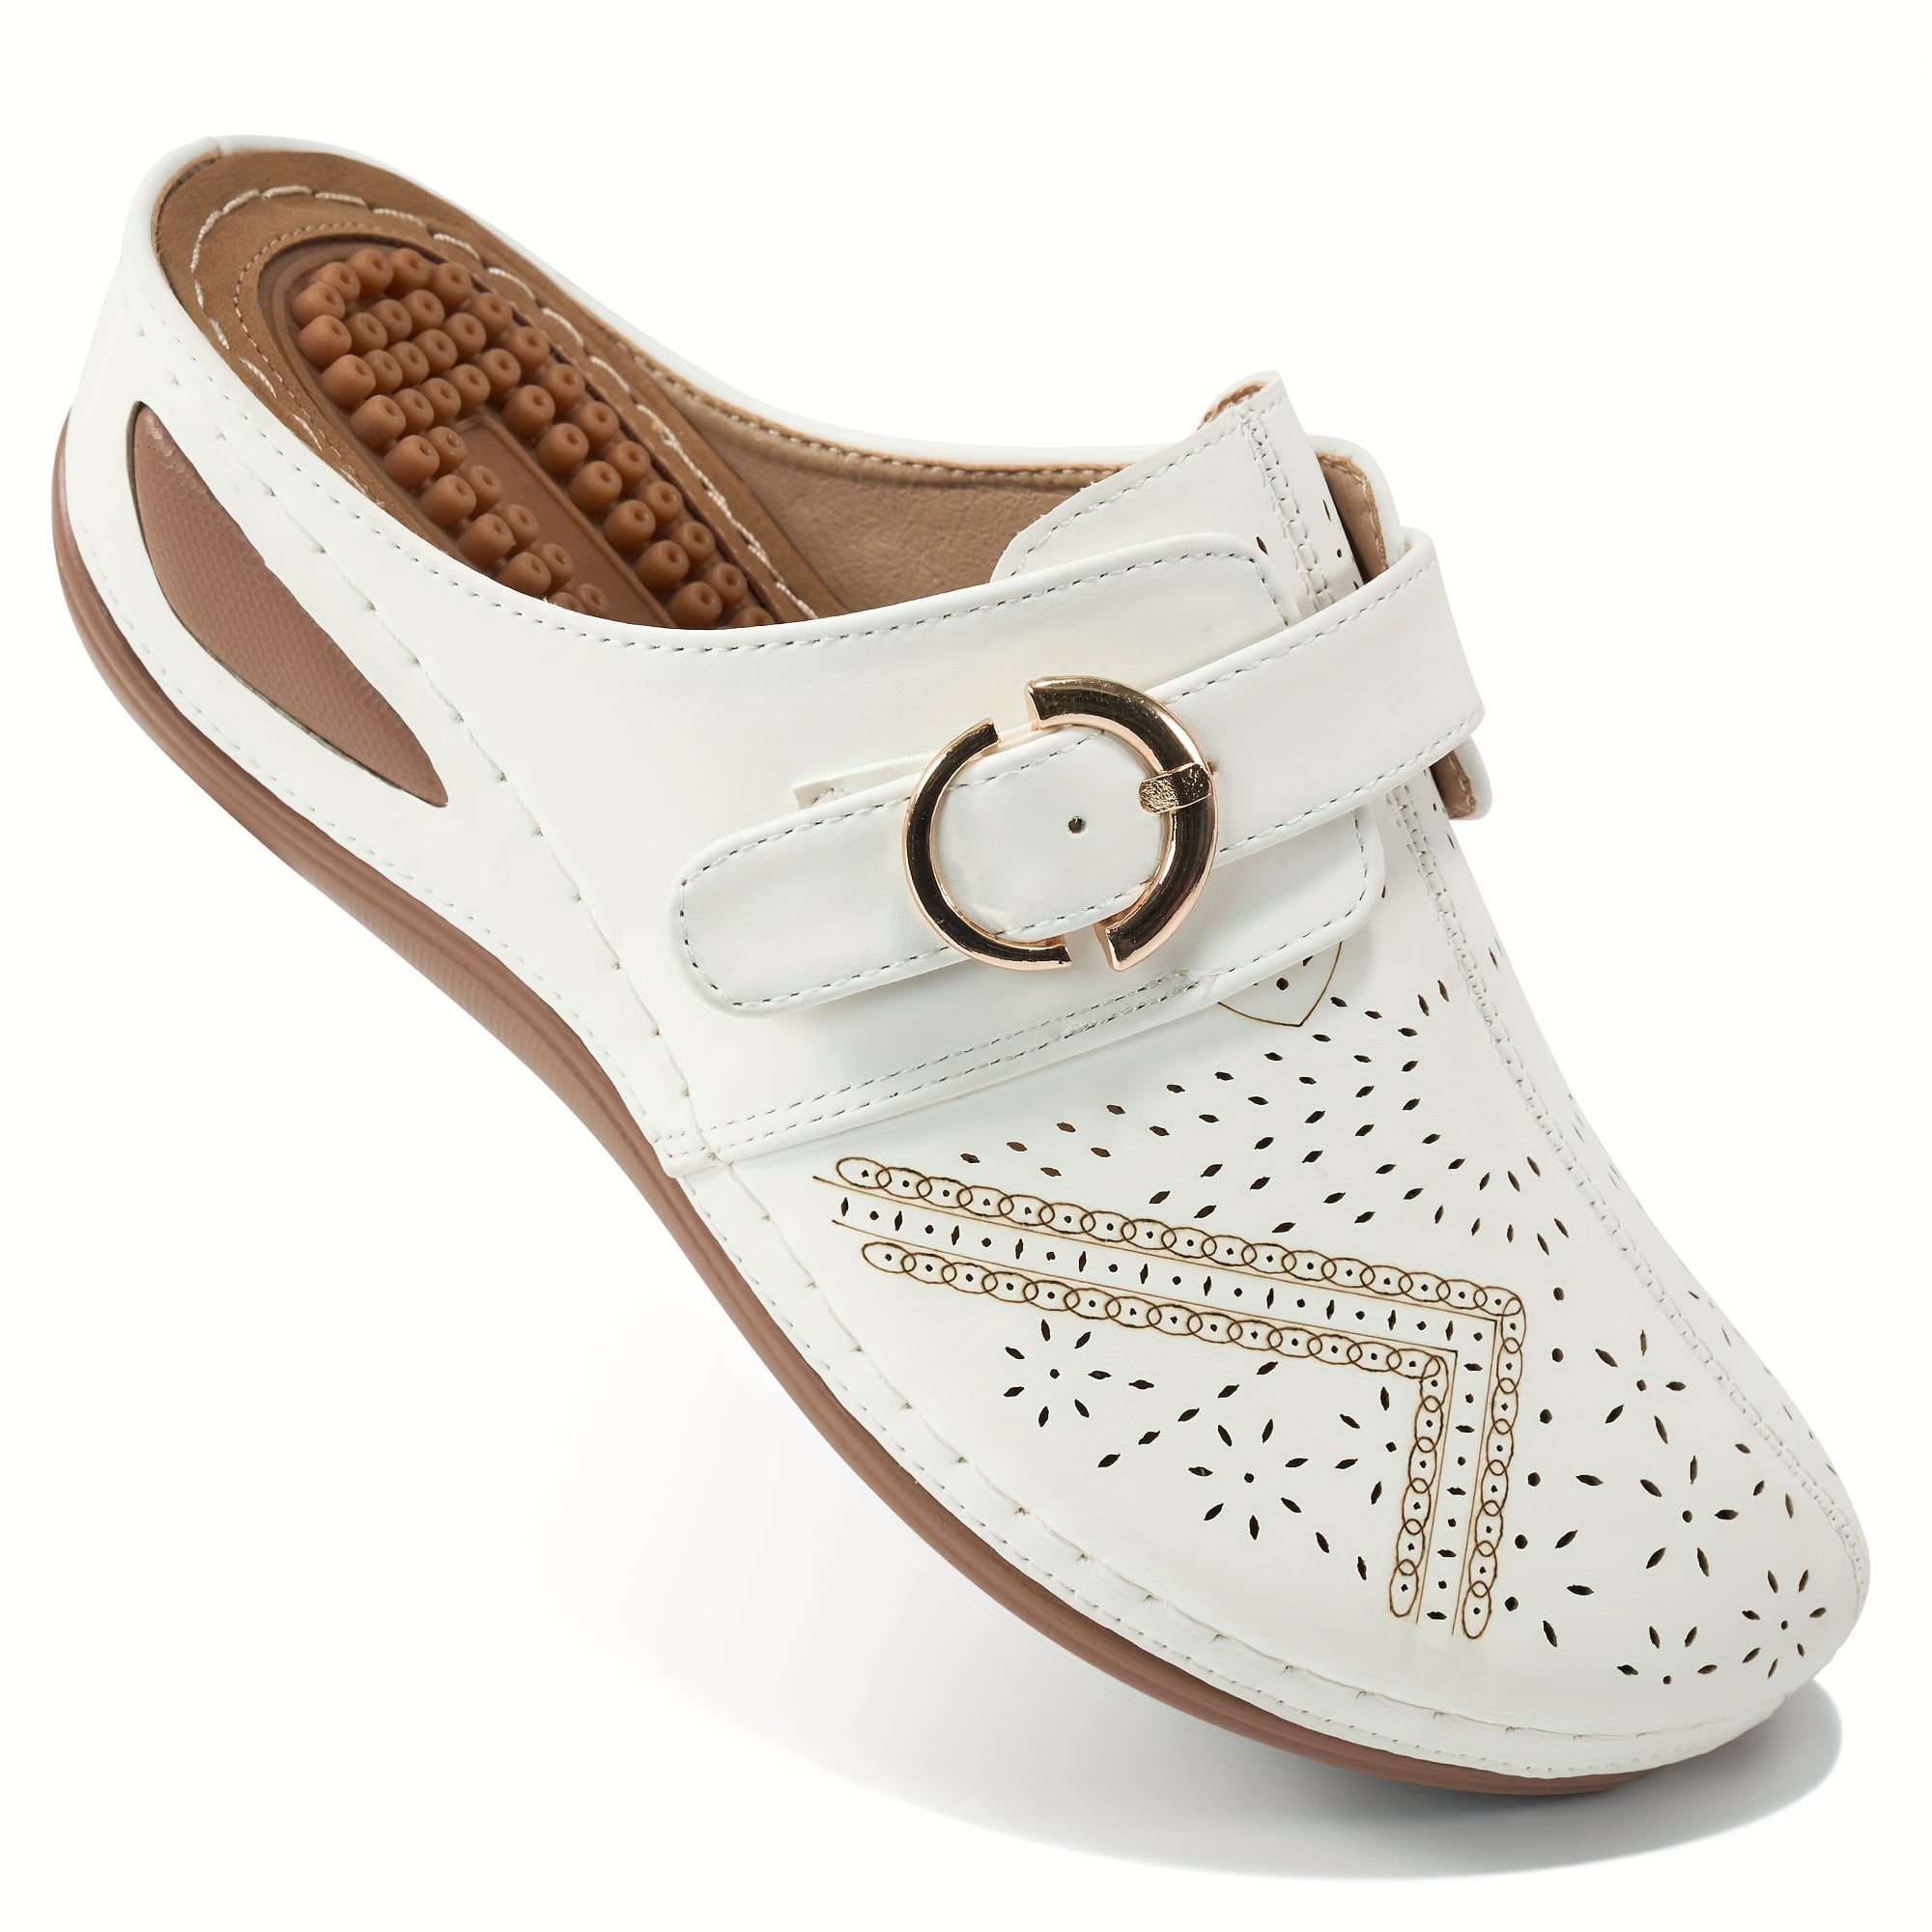 Women's Wedge Slide Sandals - Perforated Closed Toe Buckle Strap Mules ...